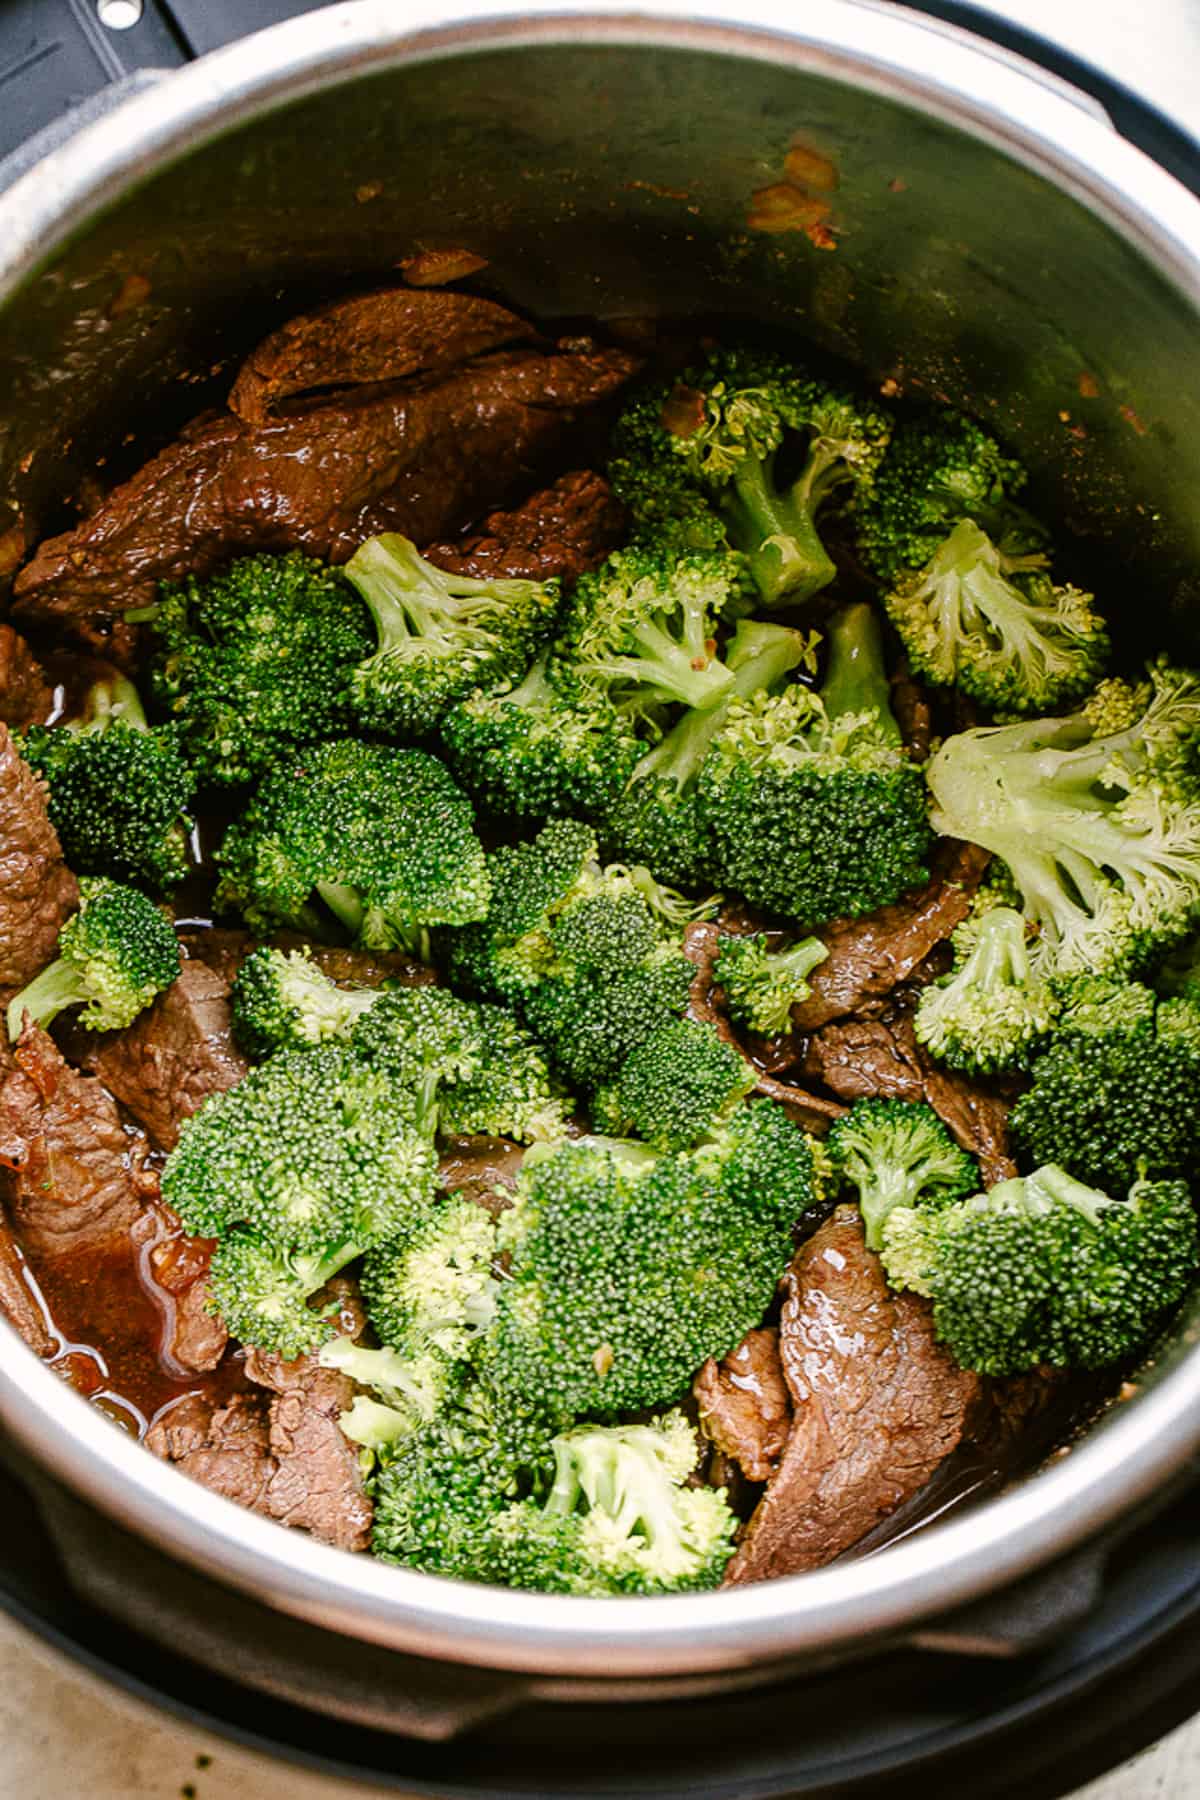 Beef and Broccoli stir fry made in the Instant Pot.